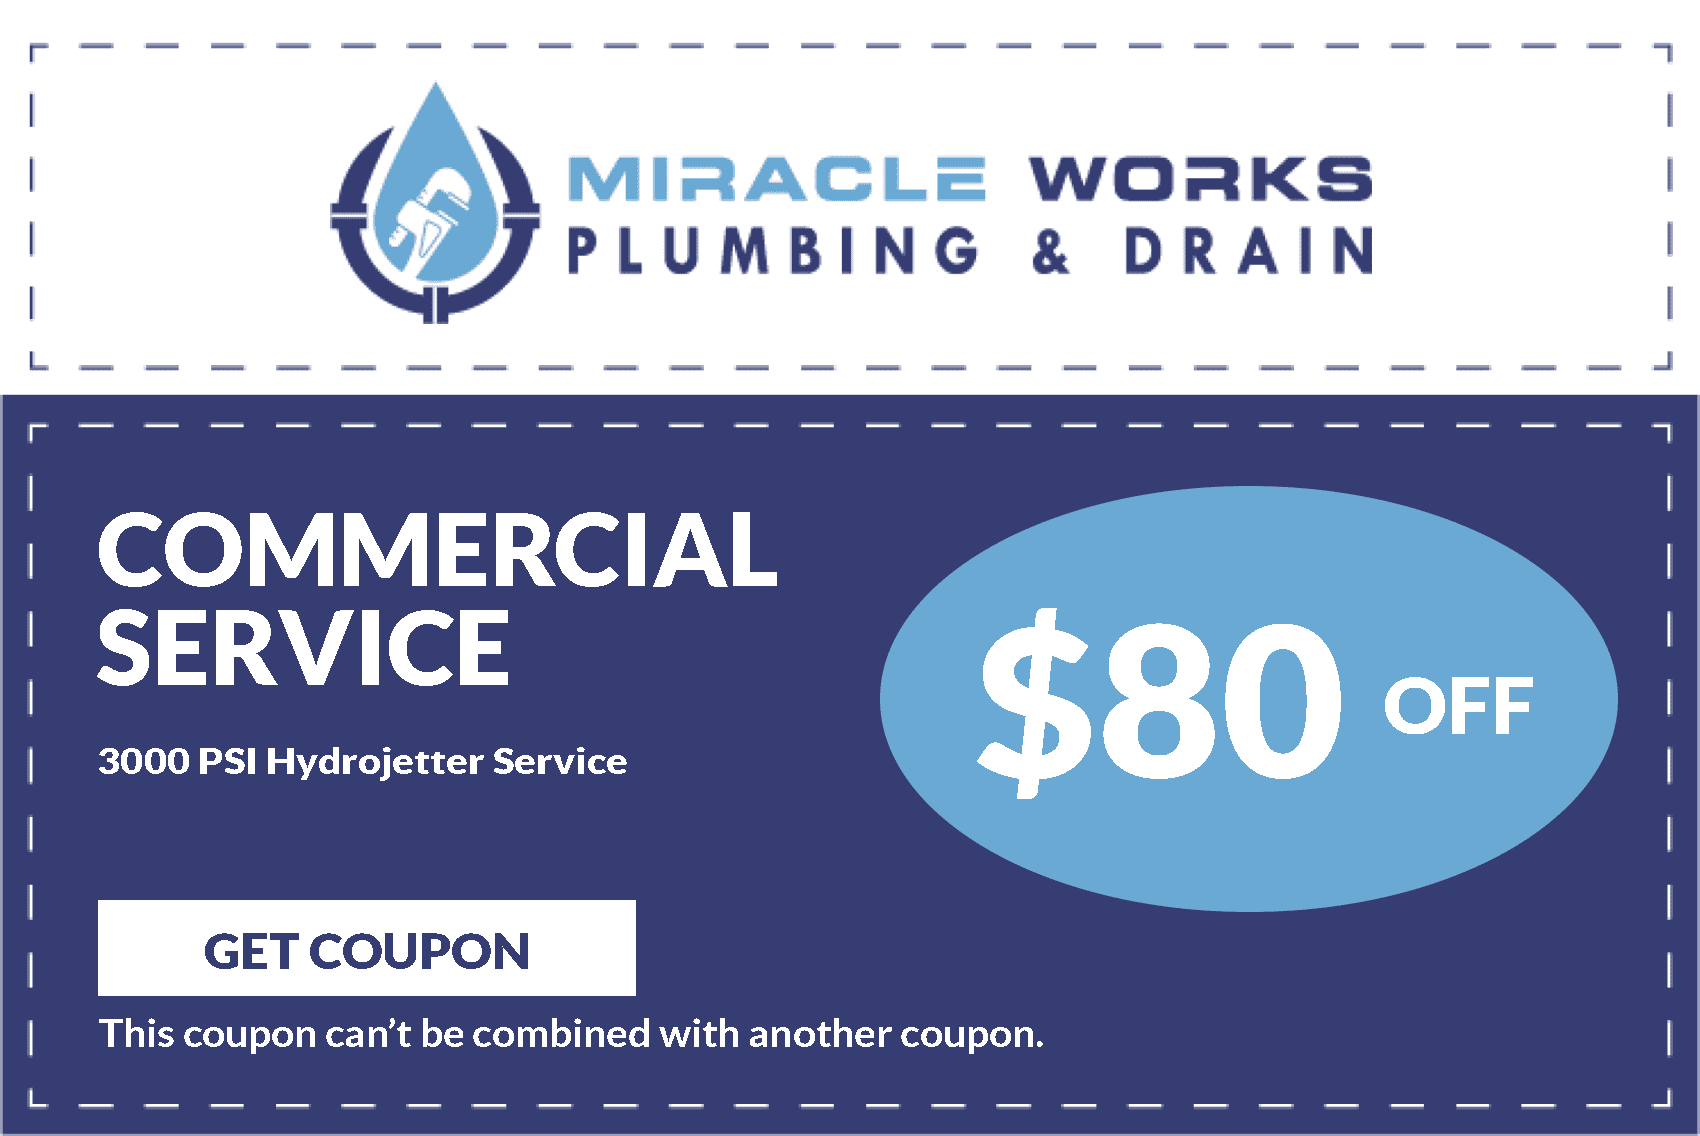 Commercial Plumbing Services Coupons